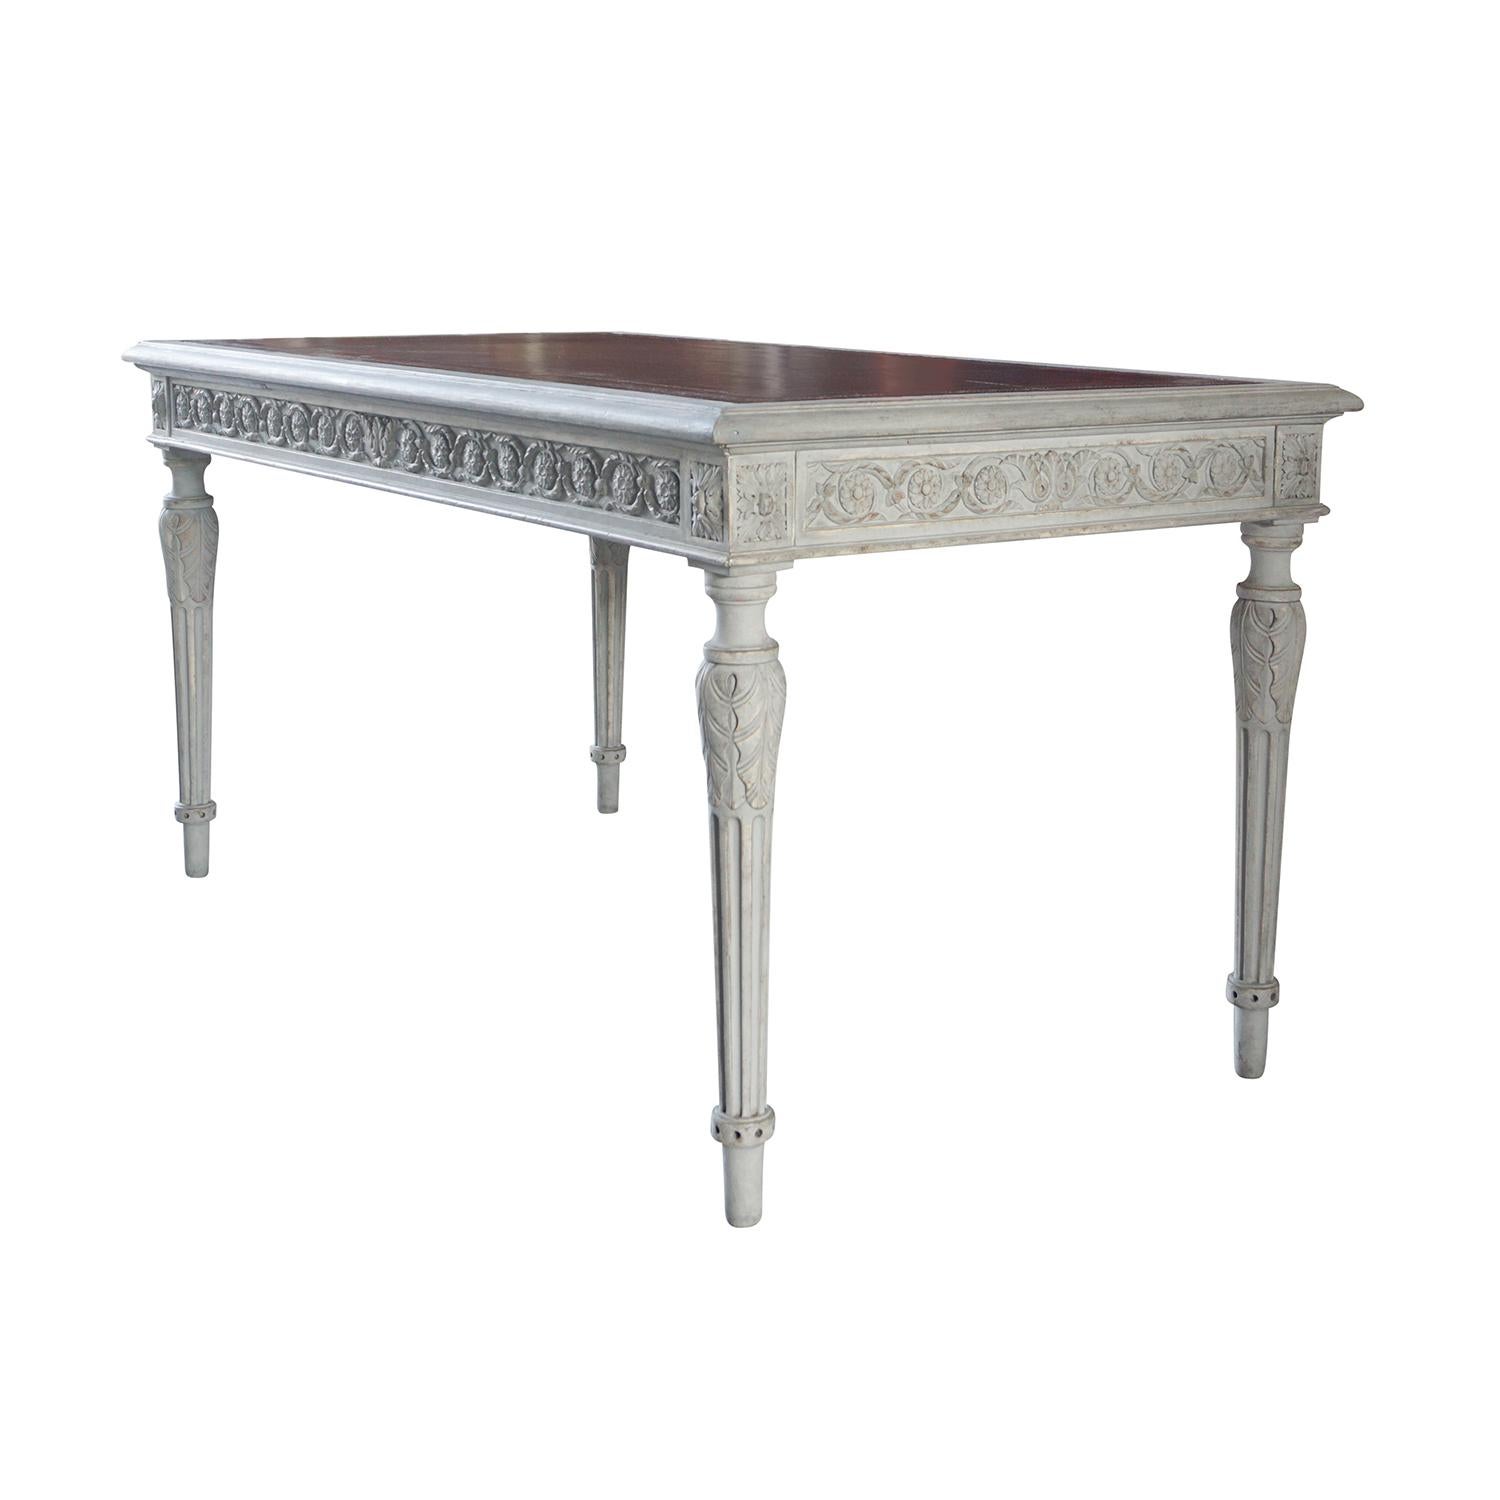 An antique Swedish Gustavian freestanding writing table made of pinewood with a grey paint and a dark red leather top. The Scandinavian, richly hand carved desk is in good condition, detailed in the neoclassical Greek style, enhanced by very